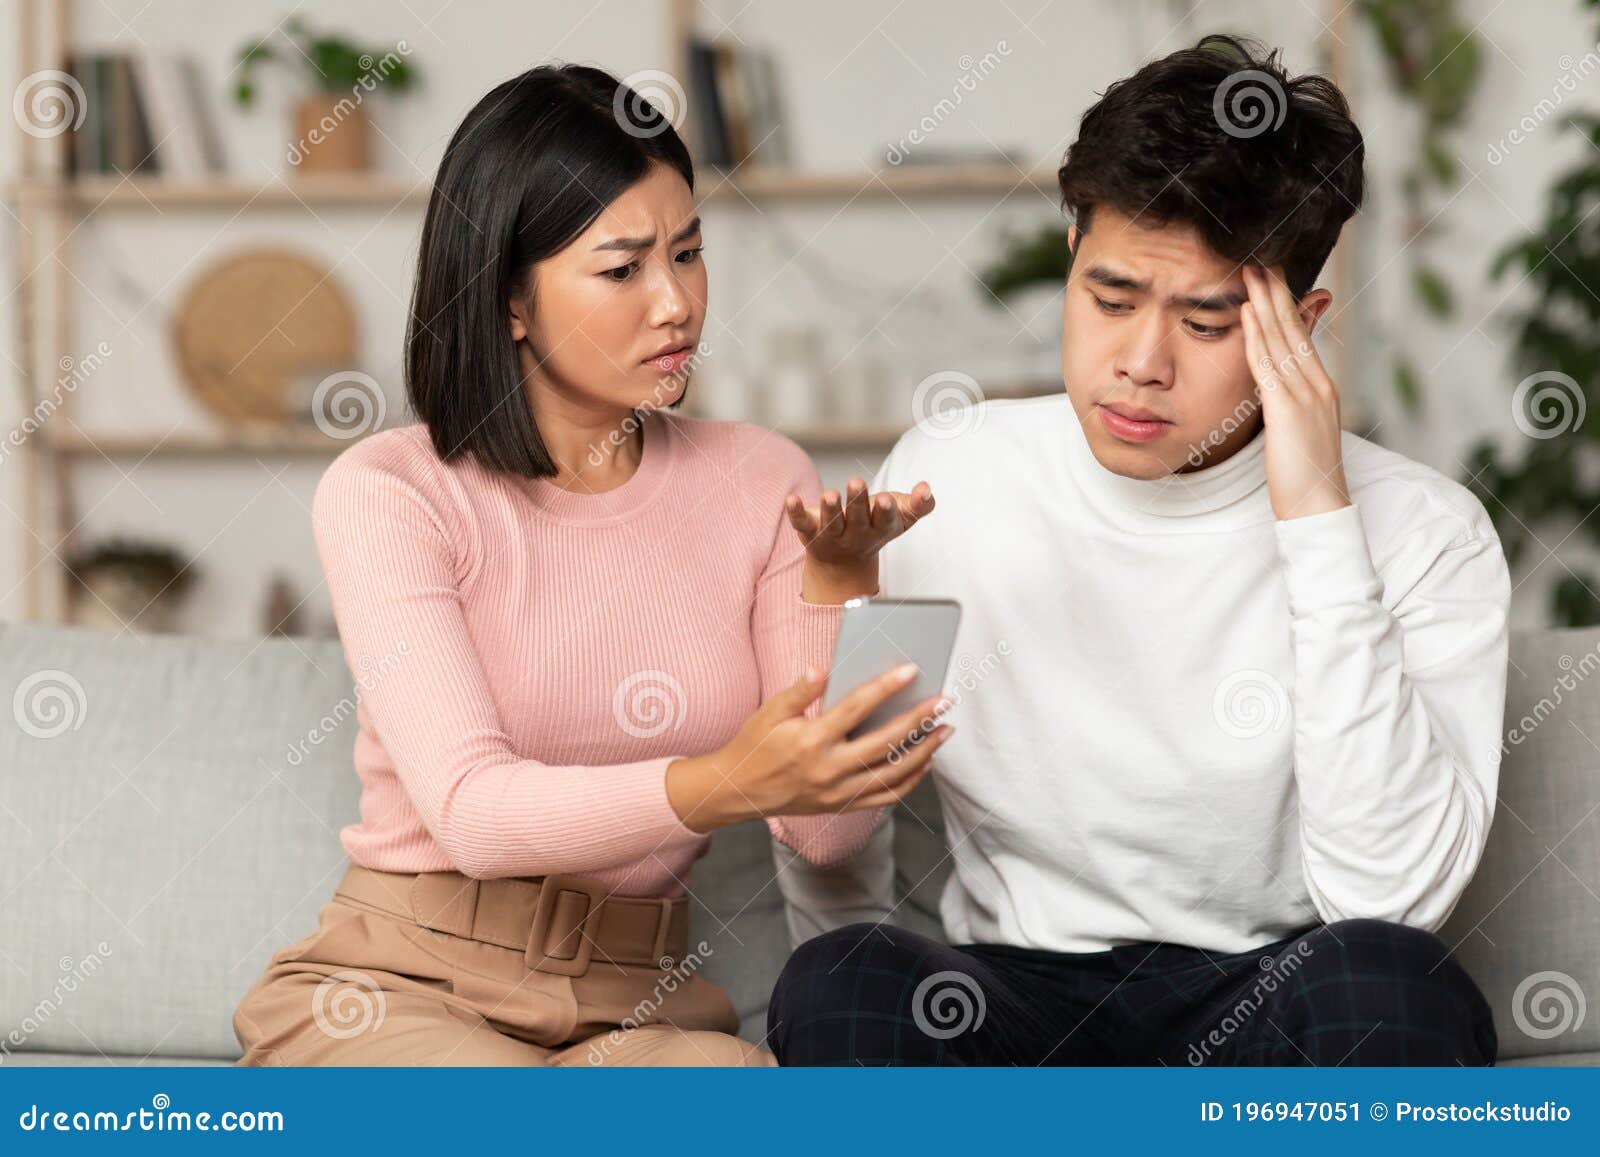 Asian Wife Showing Cheating Husband His Phone Suspecting Affair Indoors